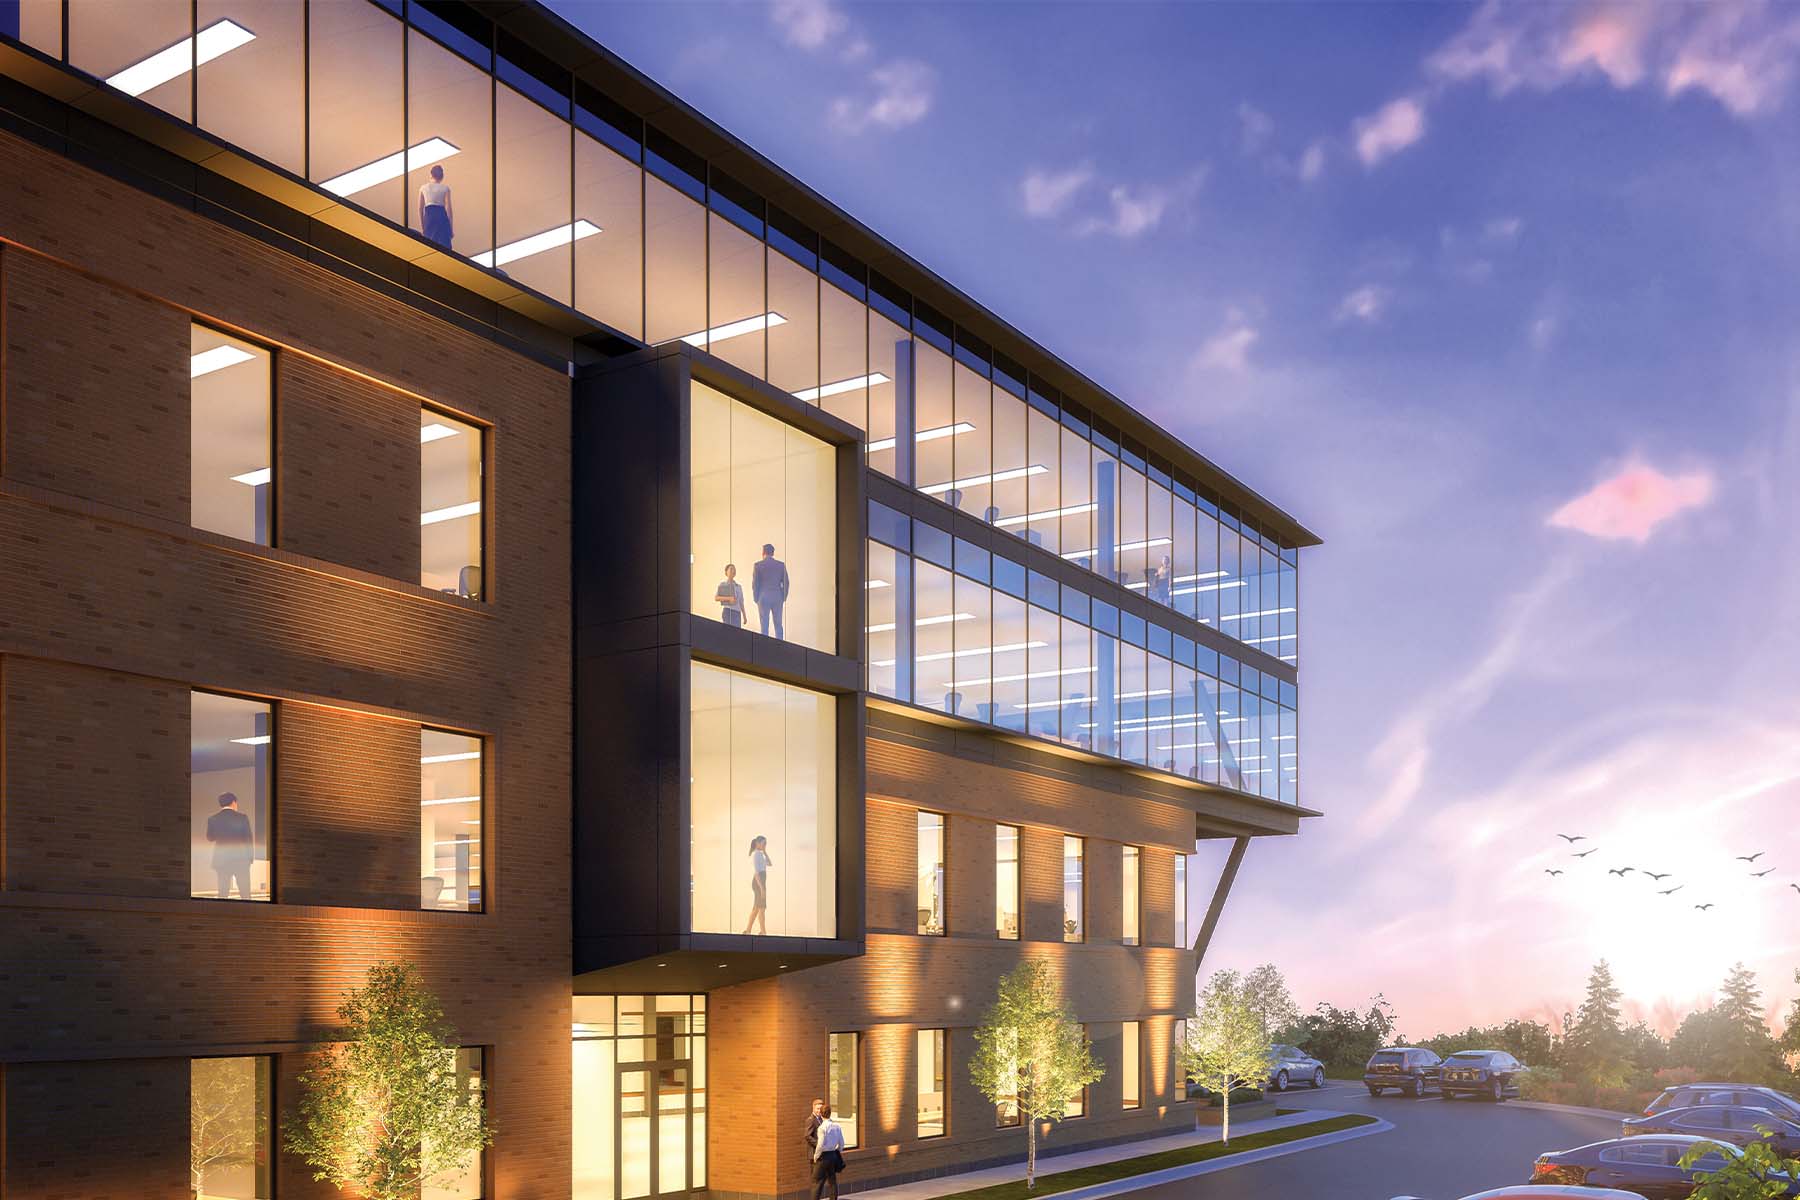 Rendering of a 4 story office building at sunset with people visible from upper story windows